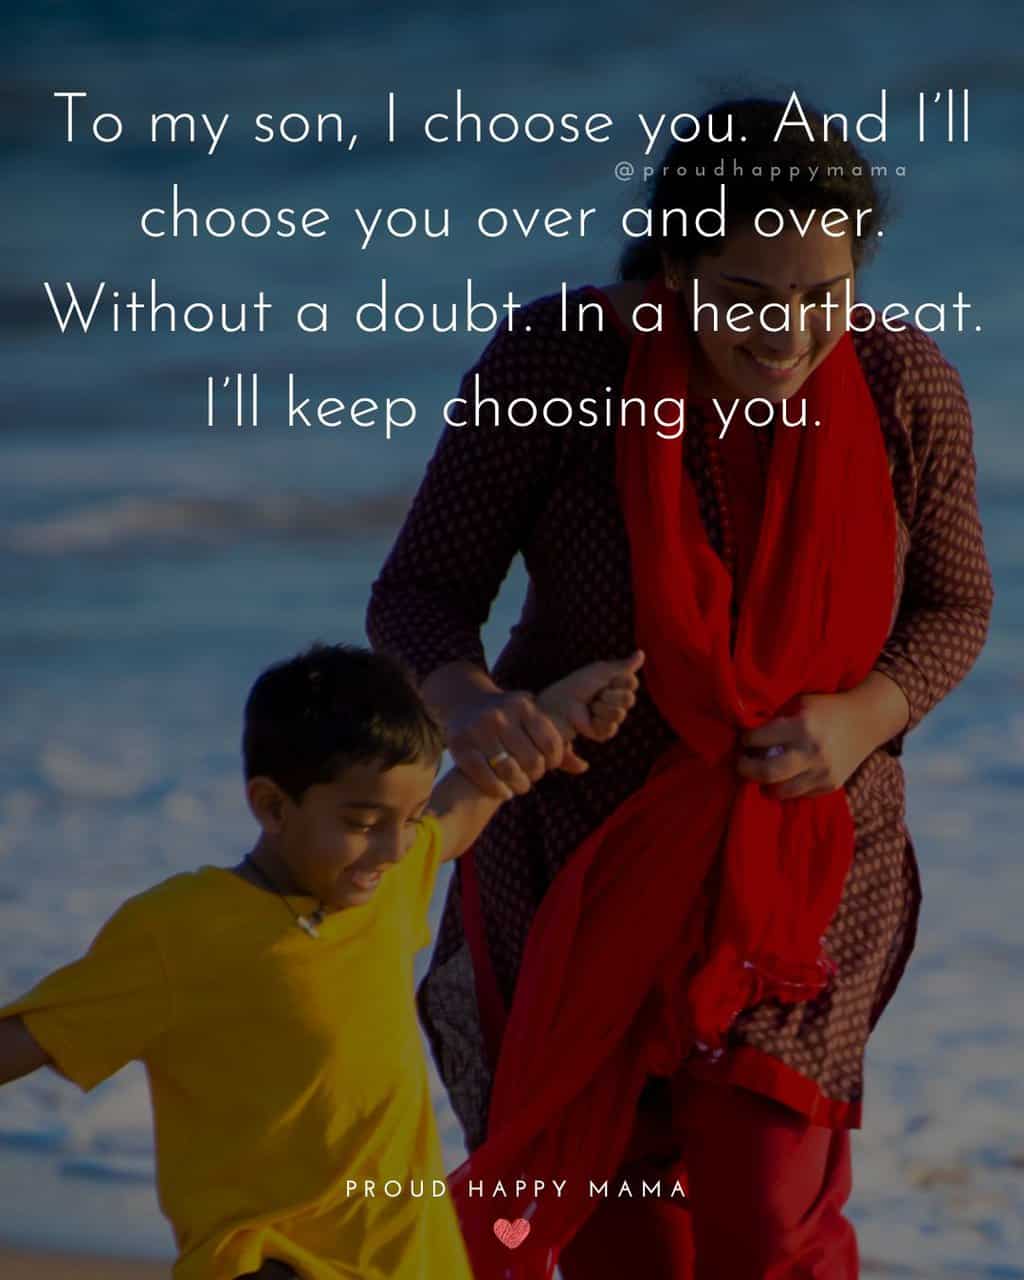 Indian mother holding sons hand while walking at the beach with a proud of son quote text overlay. ‘To my son, I choose you. And I’ll choose you over and over. Without a doubt. In a heartbeat. I’ll keep choosing you.’